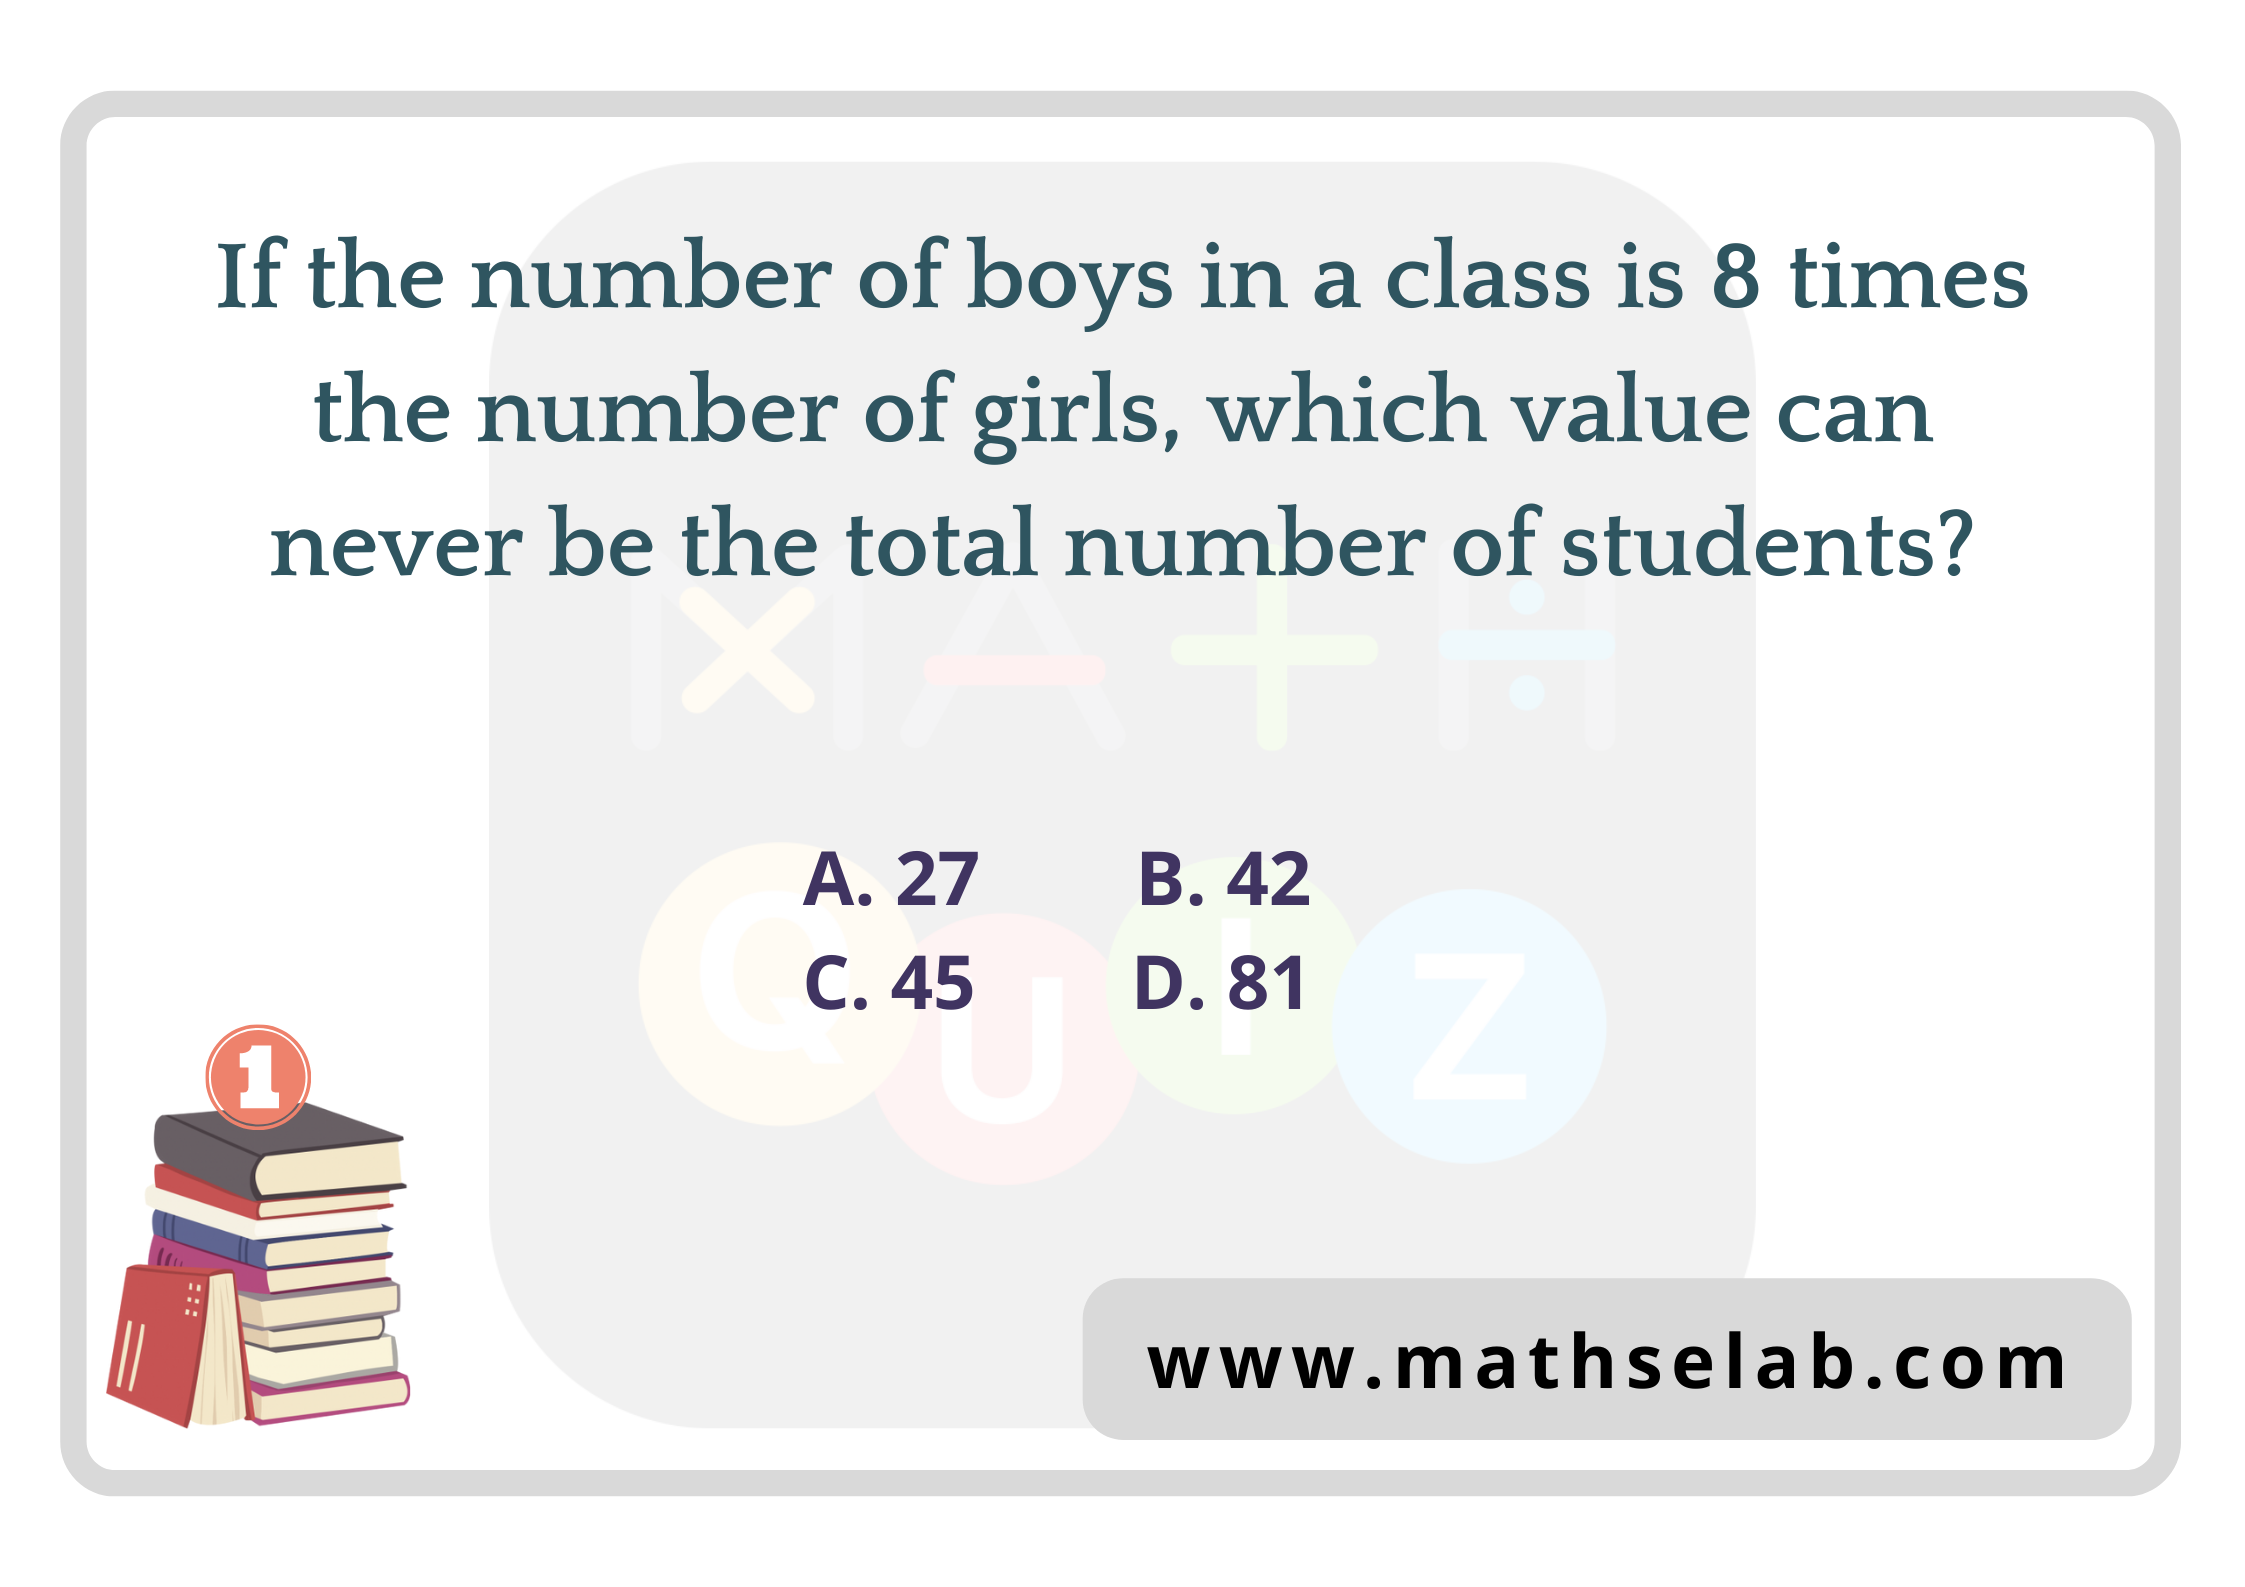 If the number of boys in a class is 8 times the number of girls, which value can never be the total number of students?